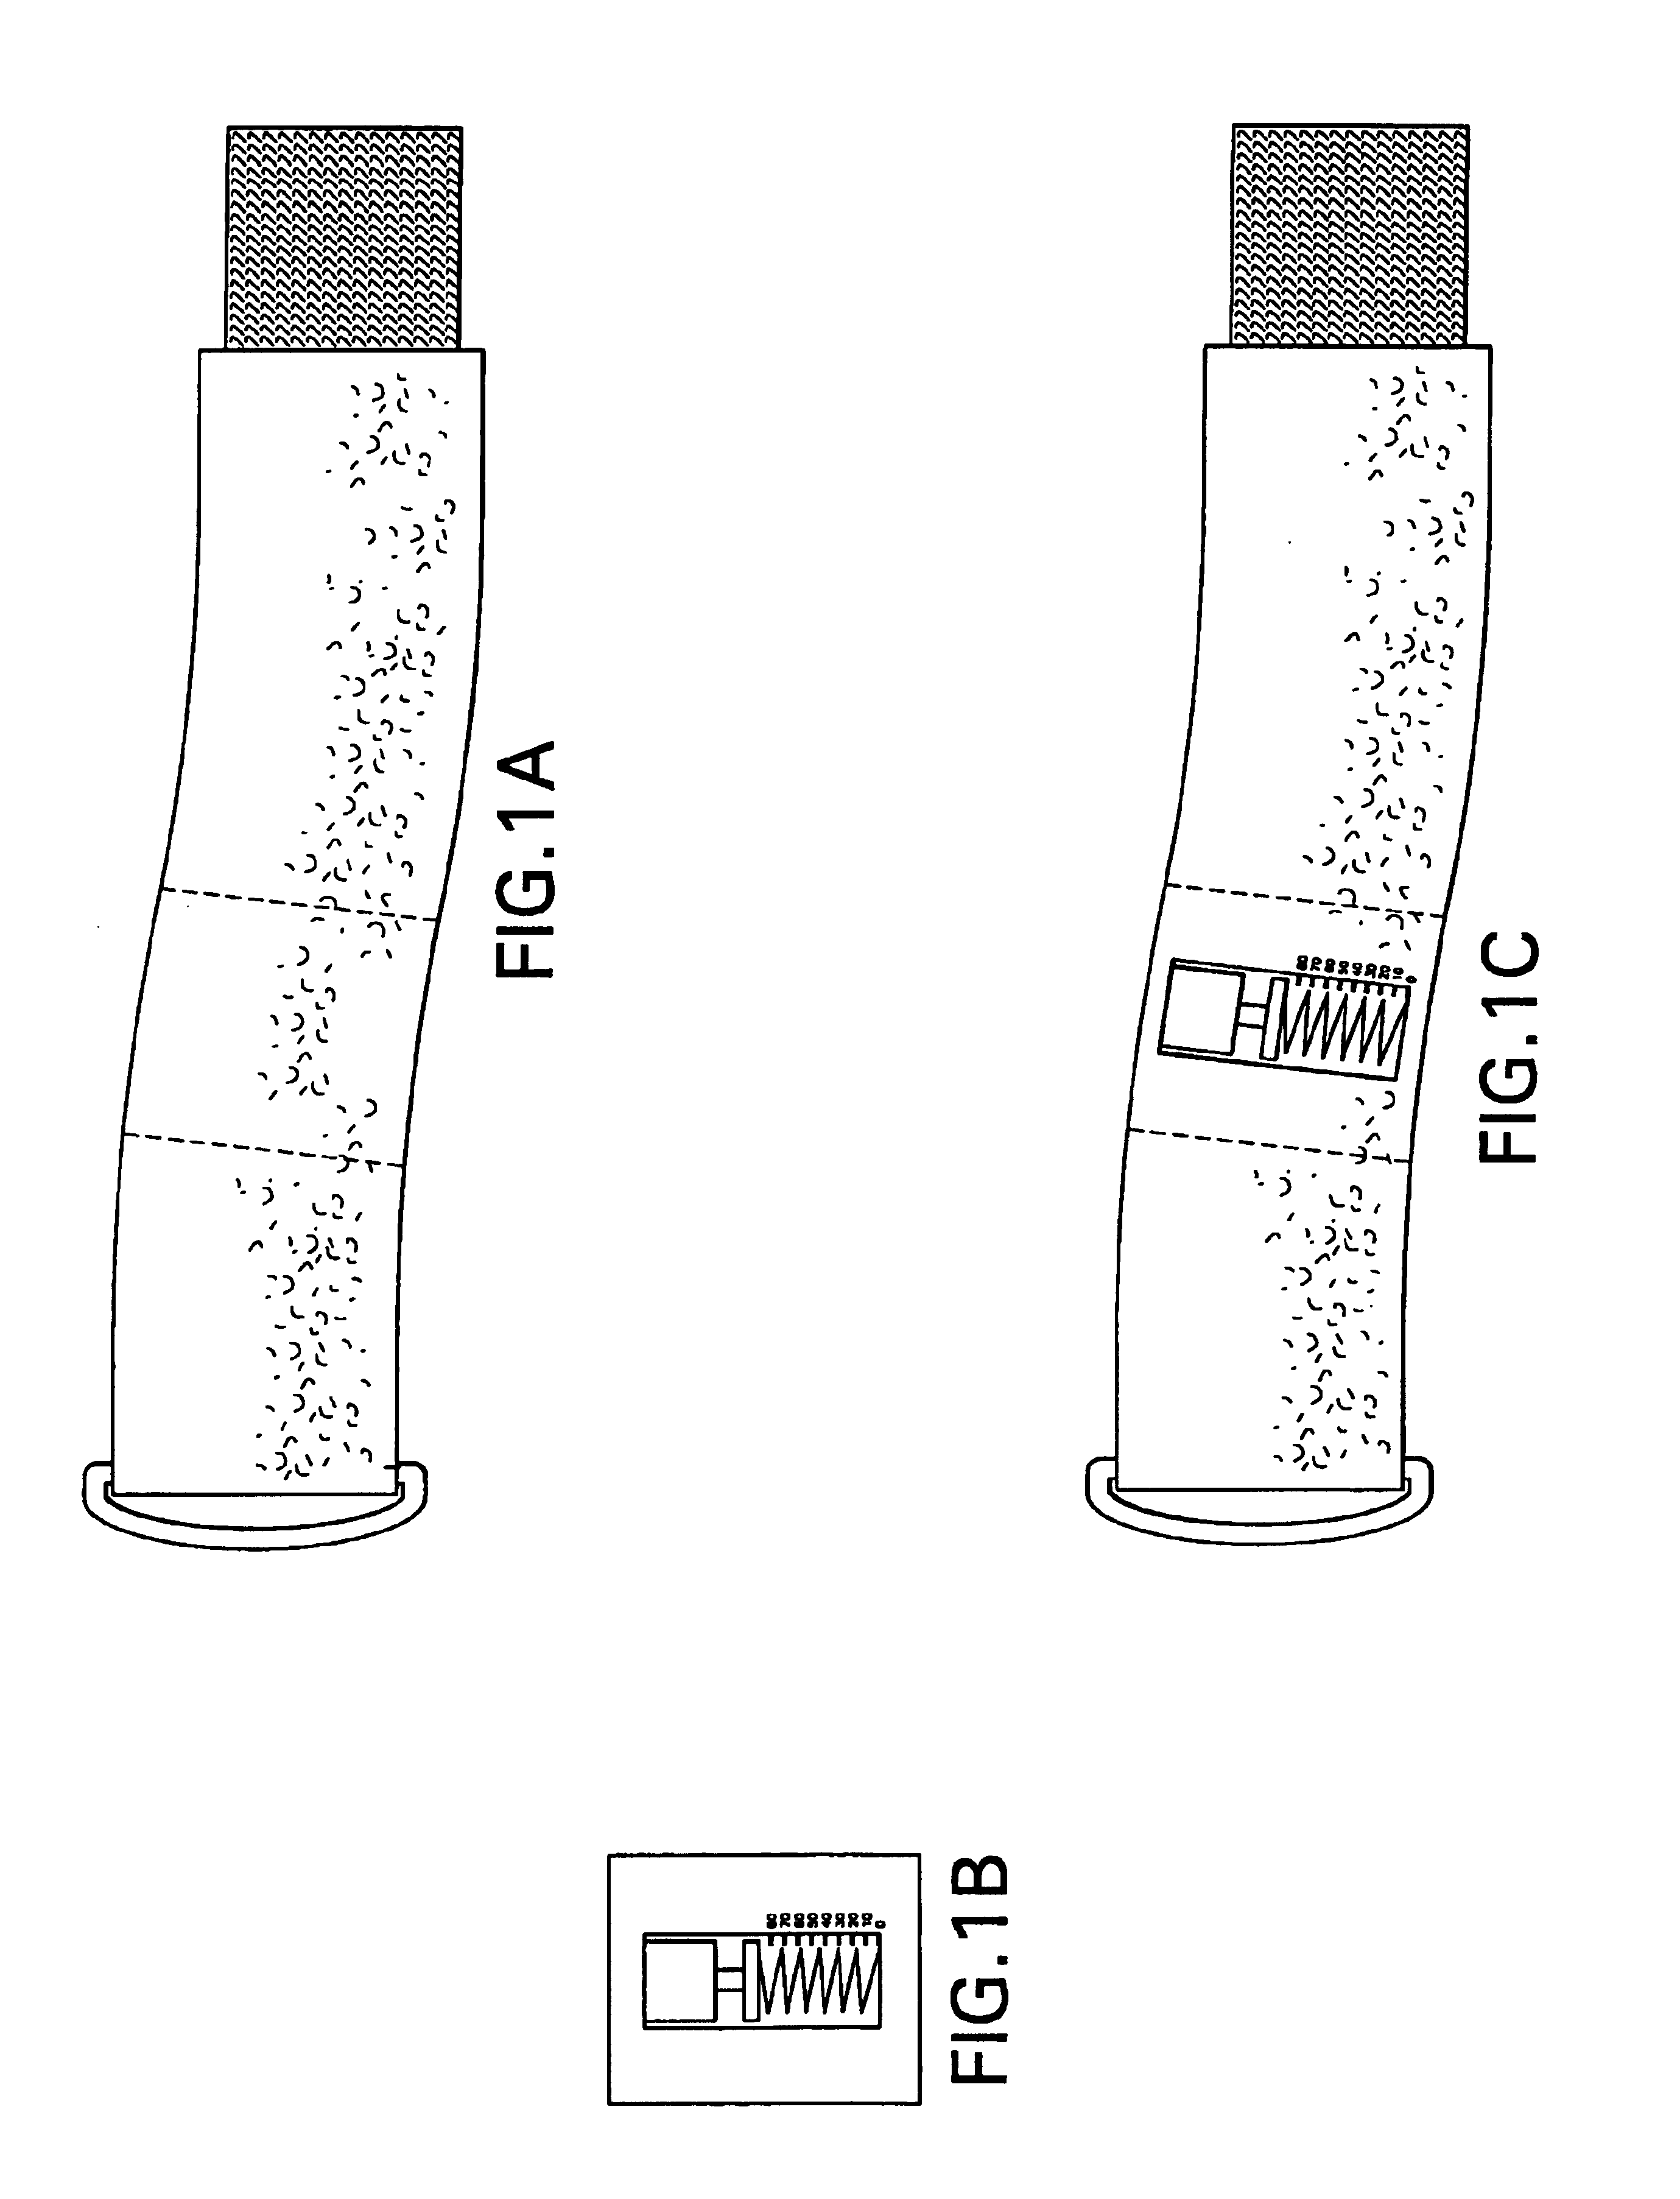 Forearm support band with direct pressure monitoring